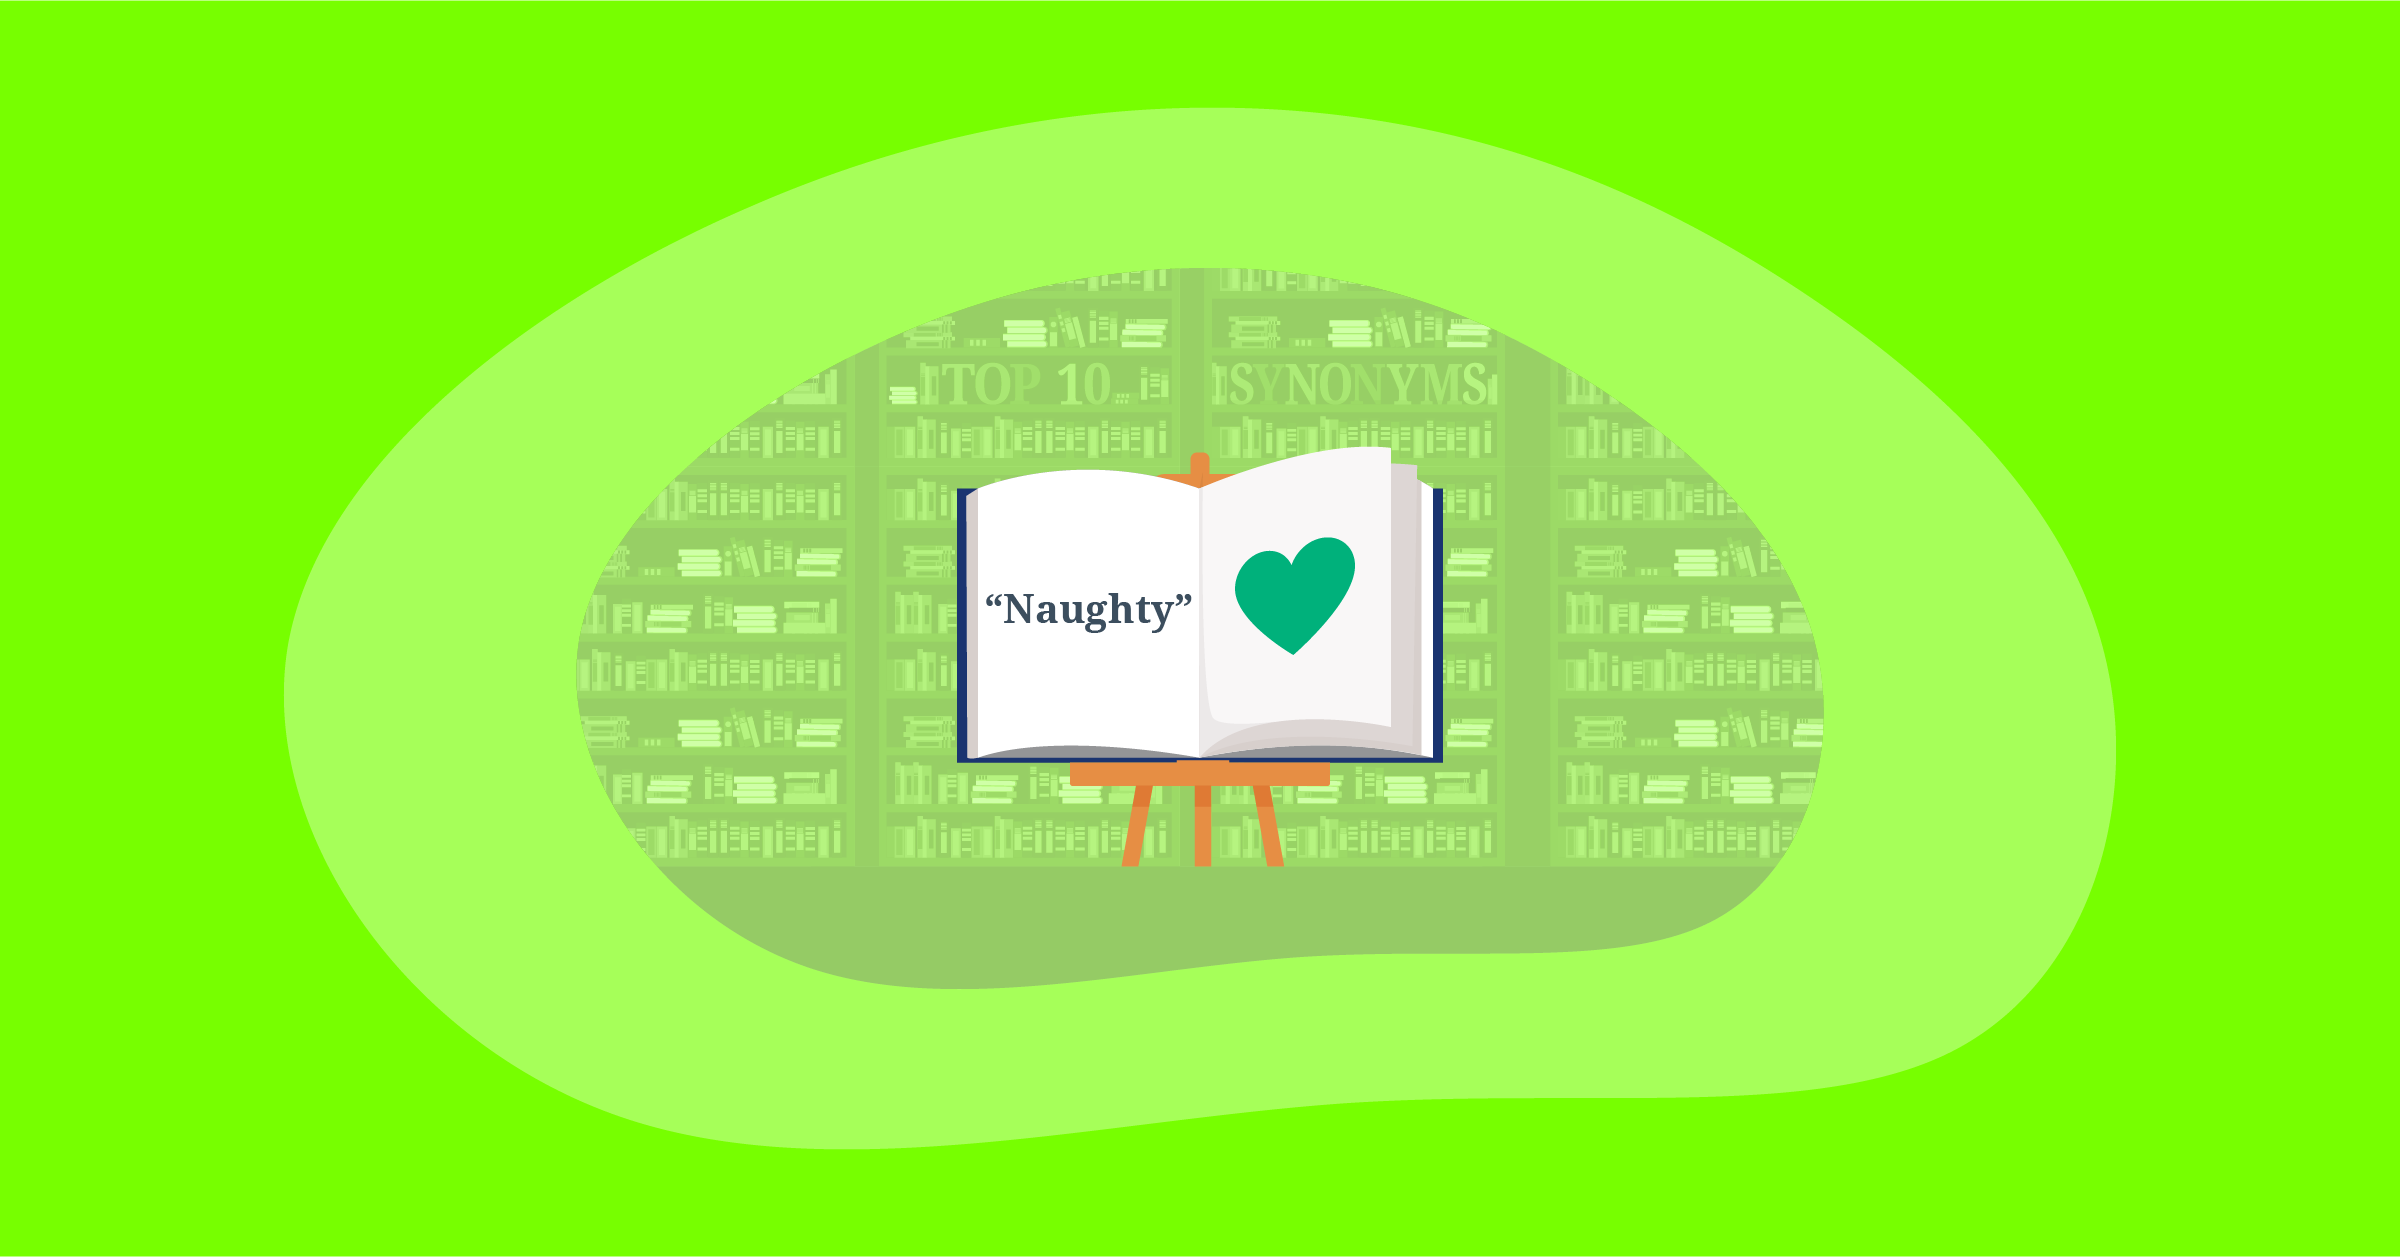 Illustration of the top 10 positive impactful synonyms for "Naughty"